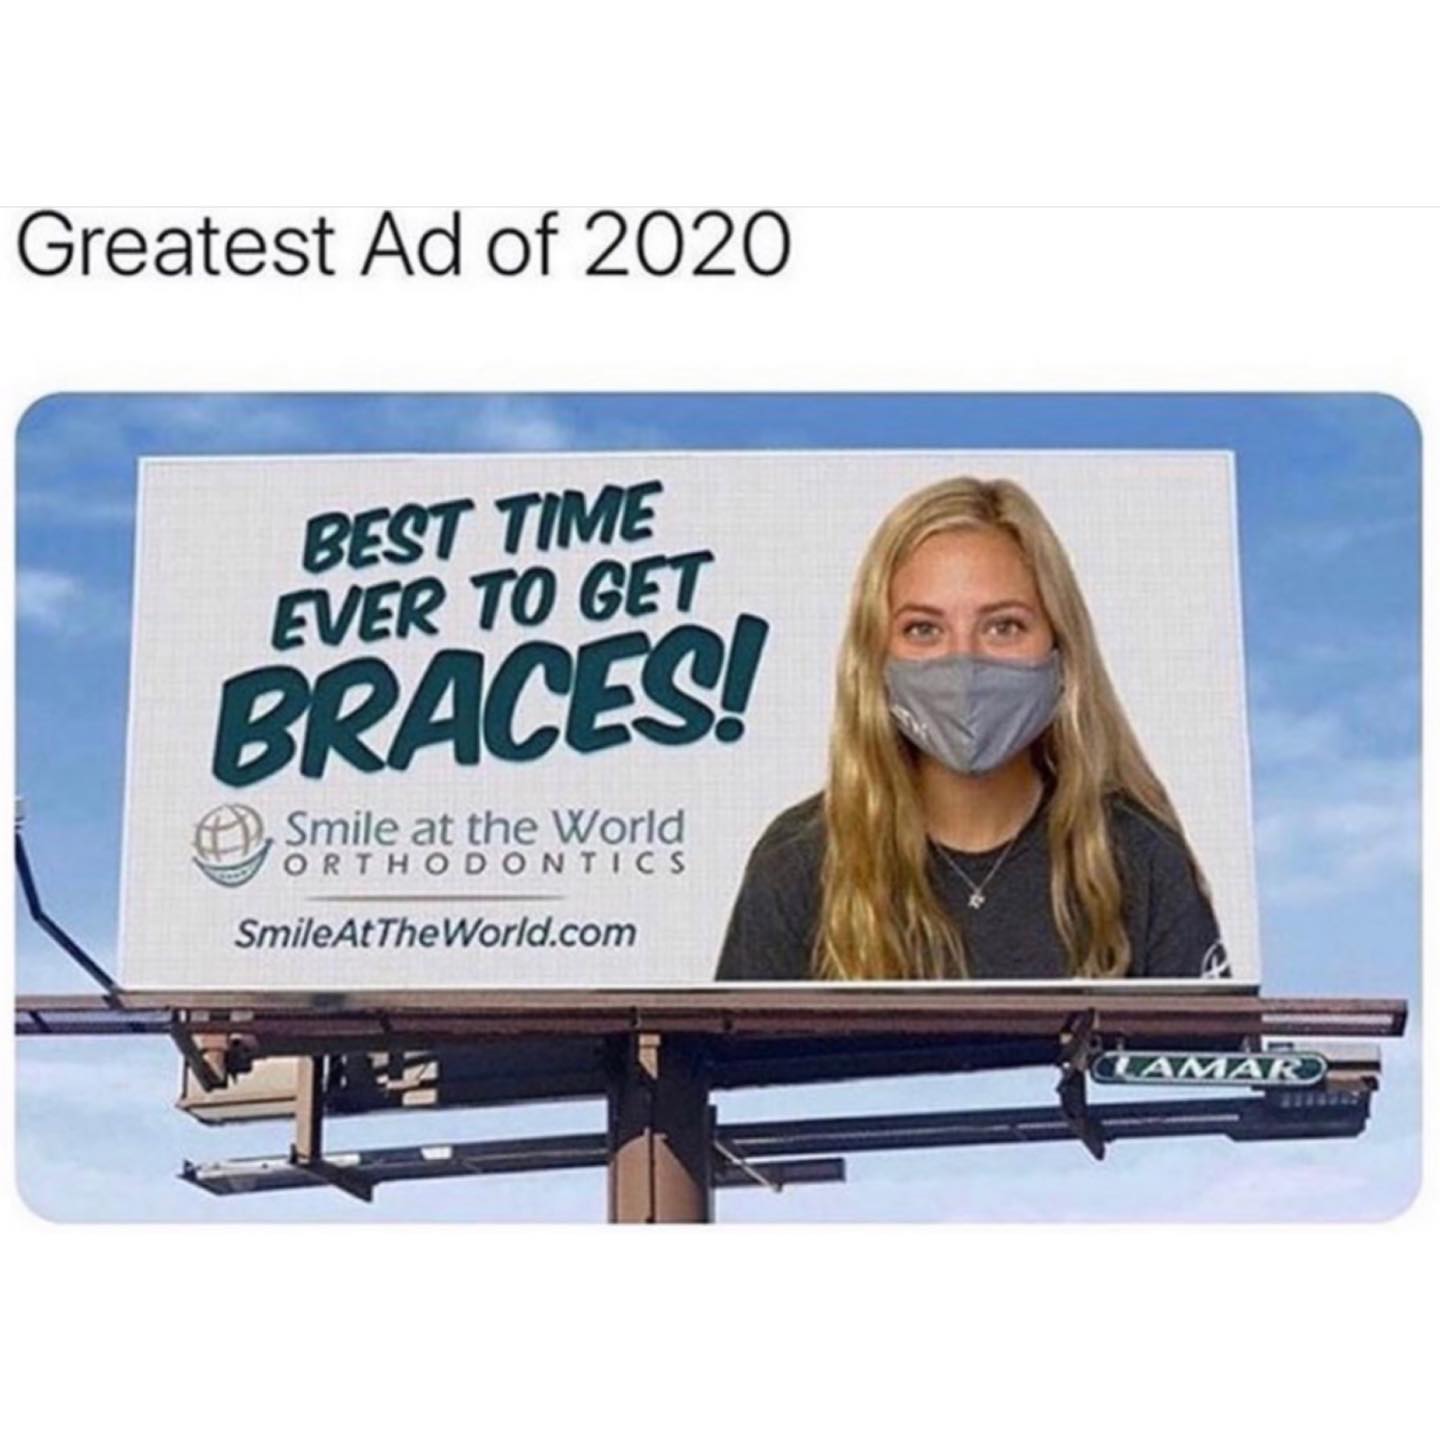 greatest ads of 2020 braces - Greatest Ad of 2020 Best Time Ever To Get Braces! Smile at the World Orthodontics SmileAtTheWorld.com Amar